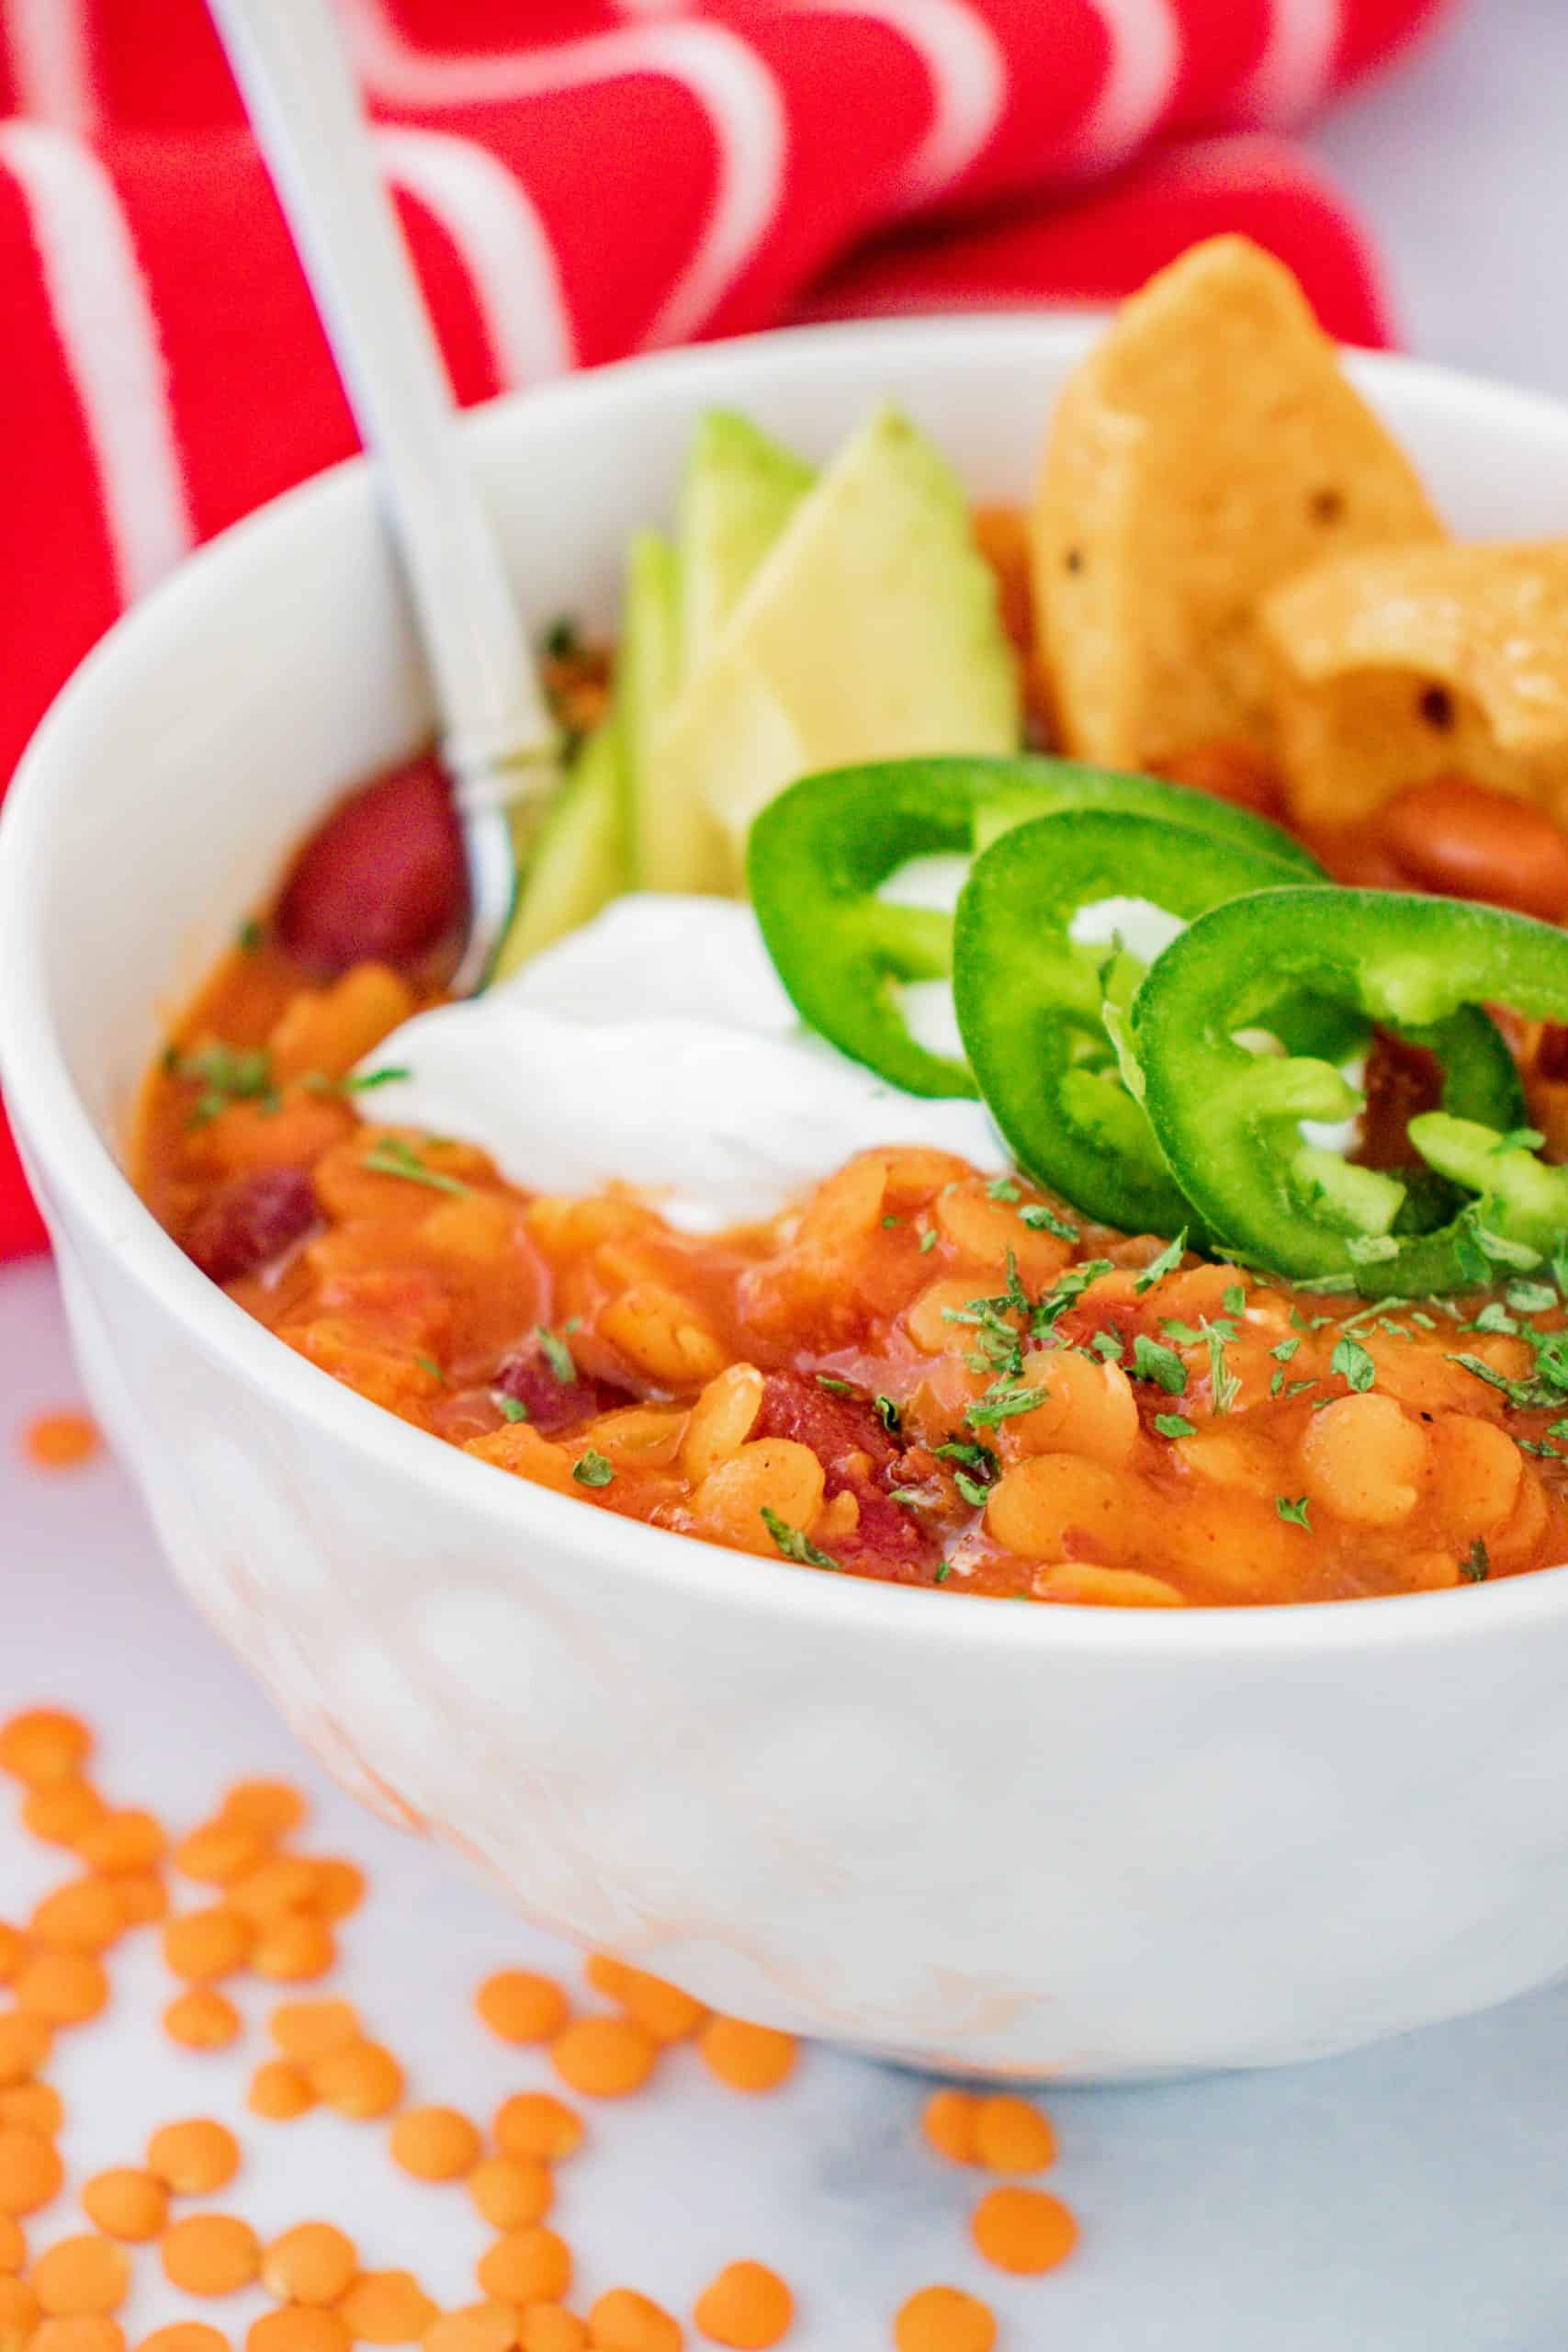 30 Minute Meatless Red Lentil Chili